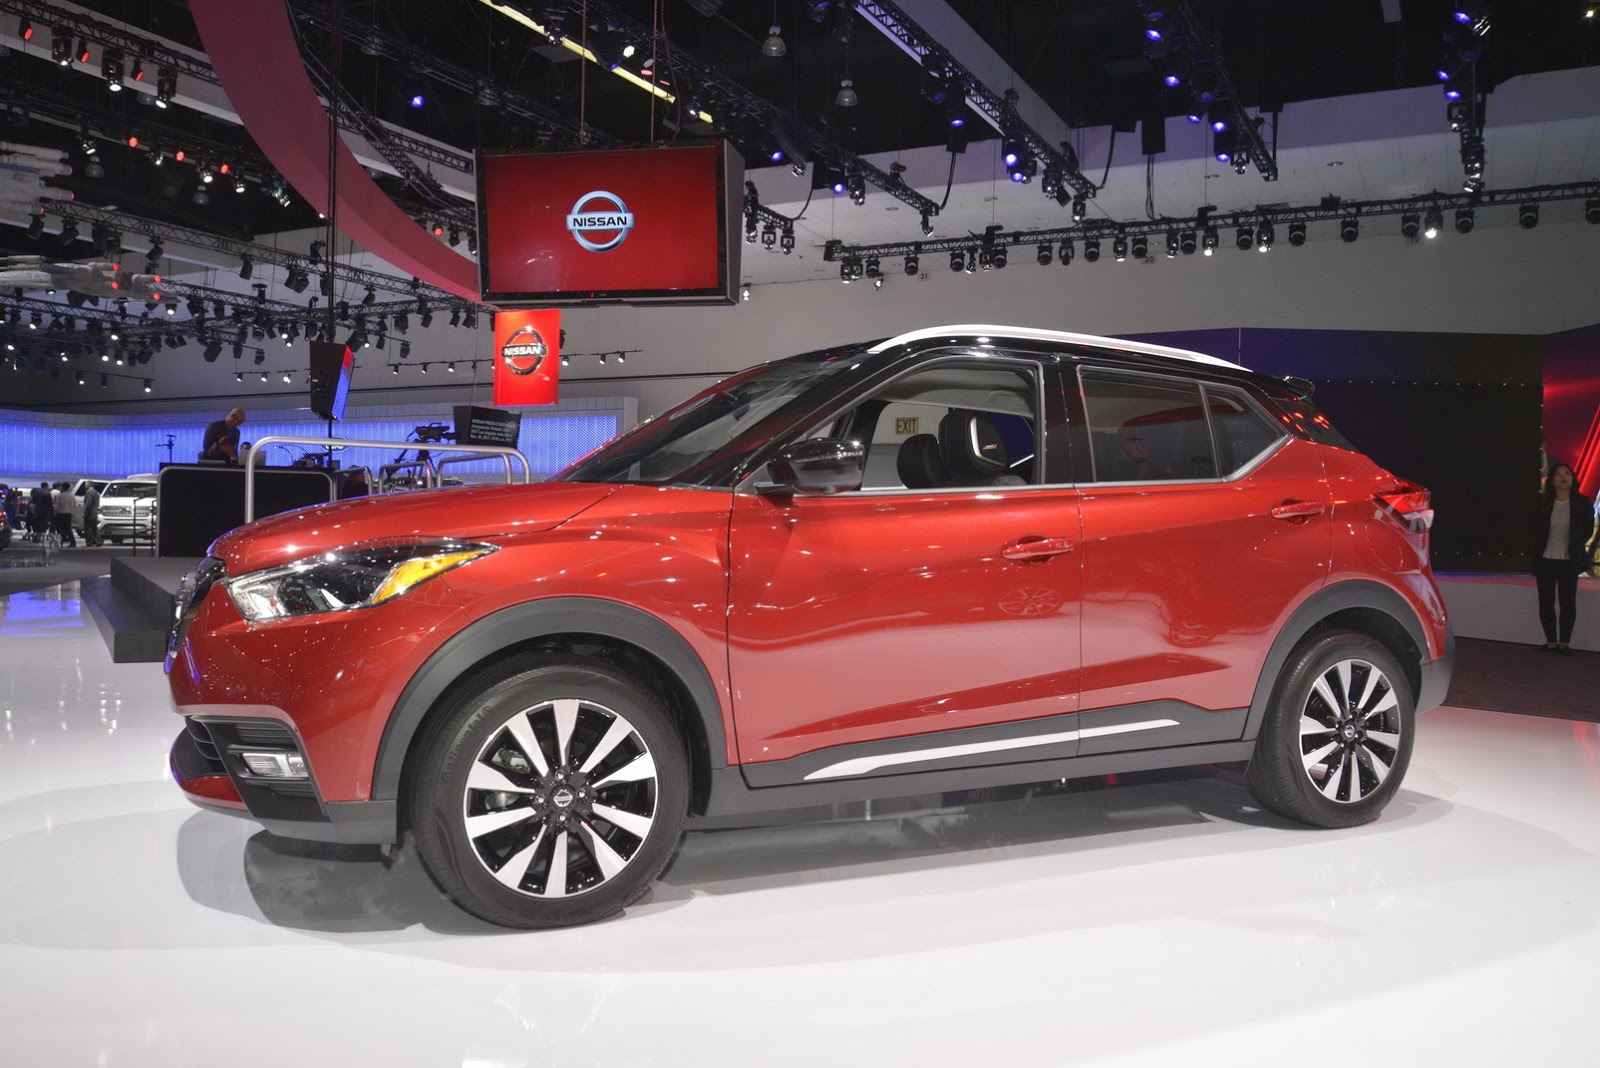 Nissan Kicks Has Its Work Cut Out In Subcompact Segment | Carscoops